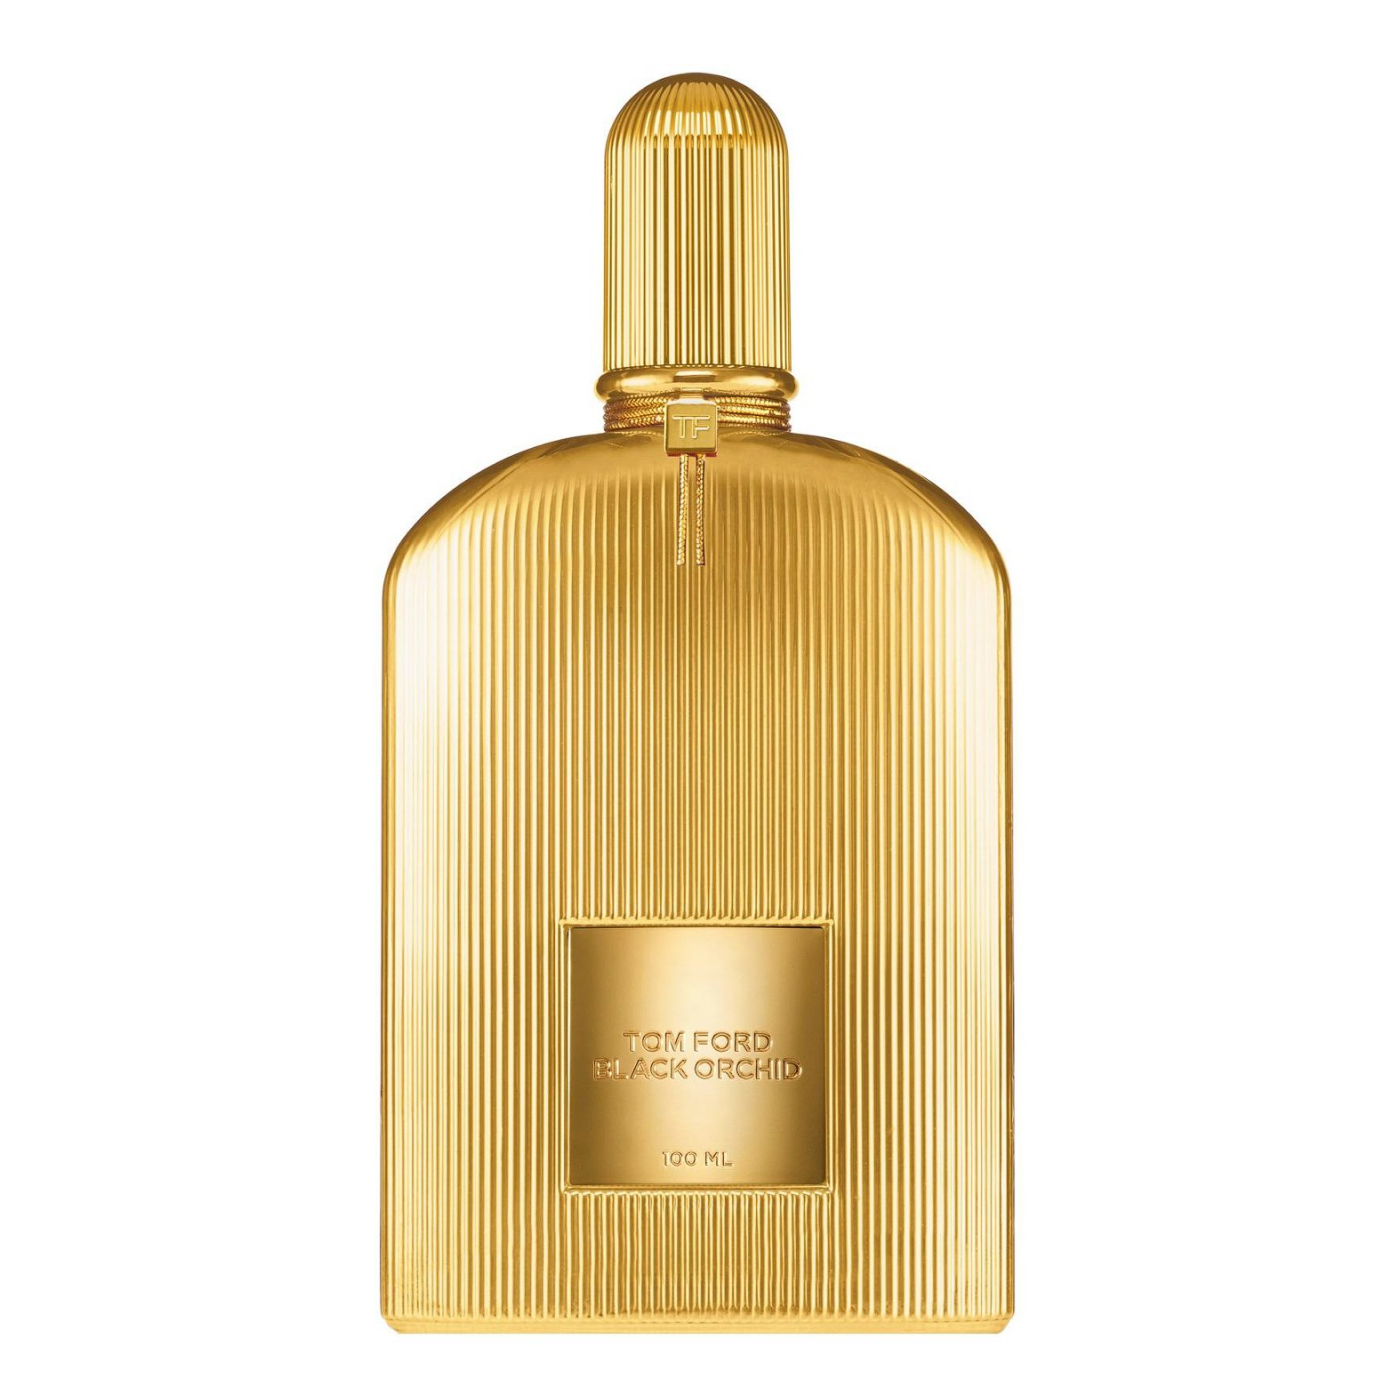 Парфюм Black Orchid Gold Tom Ford